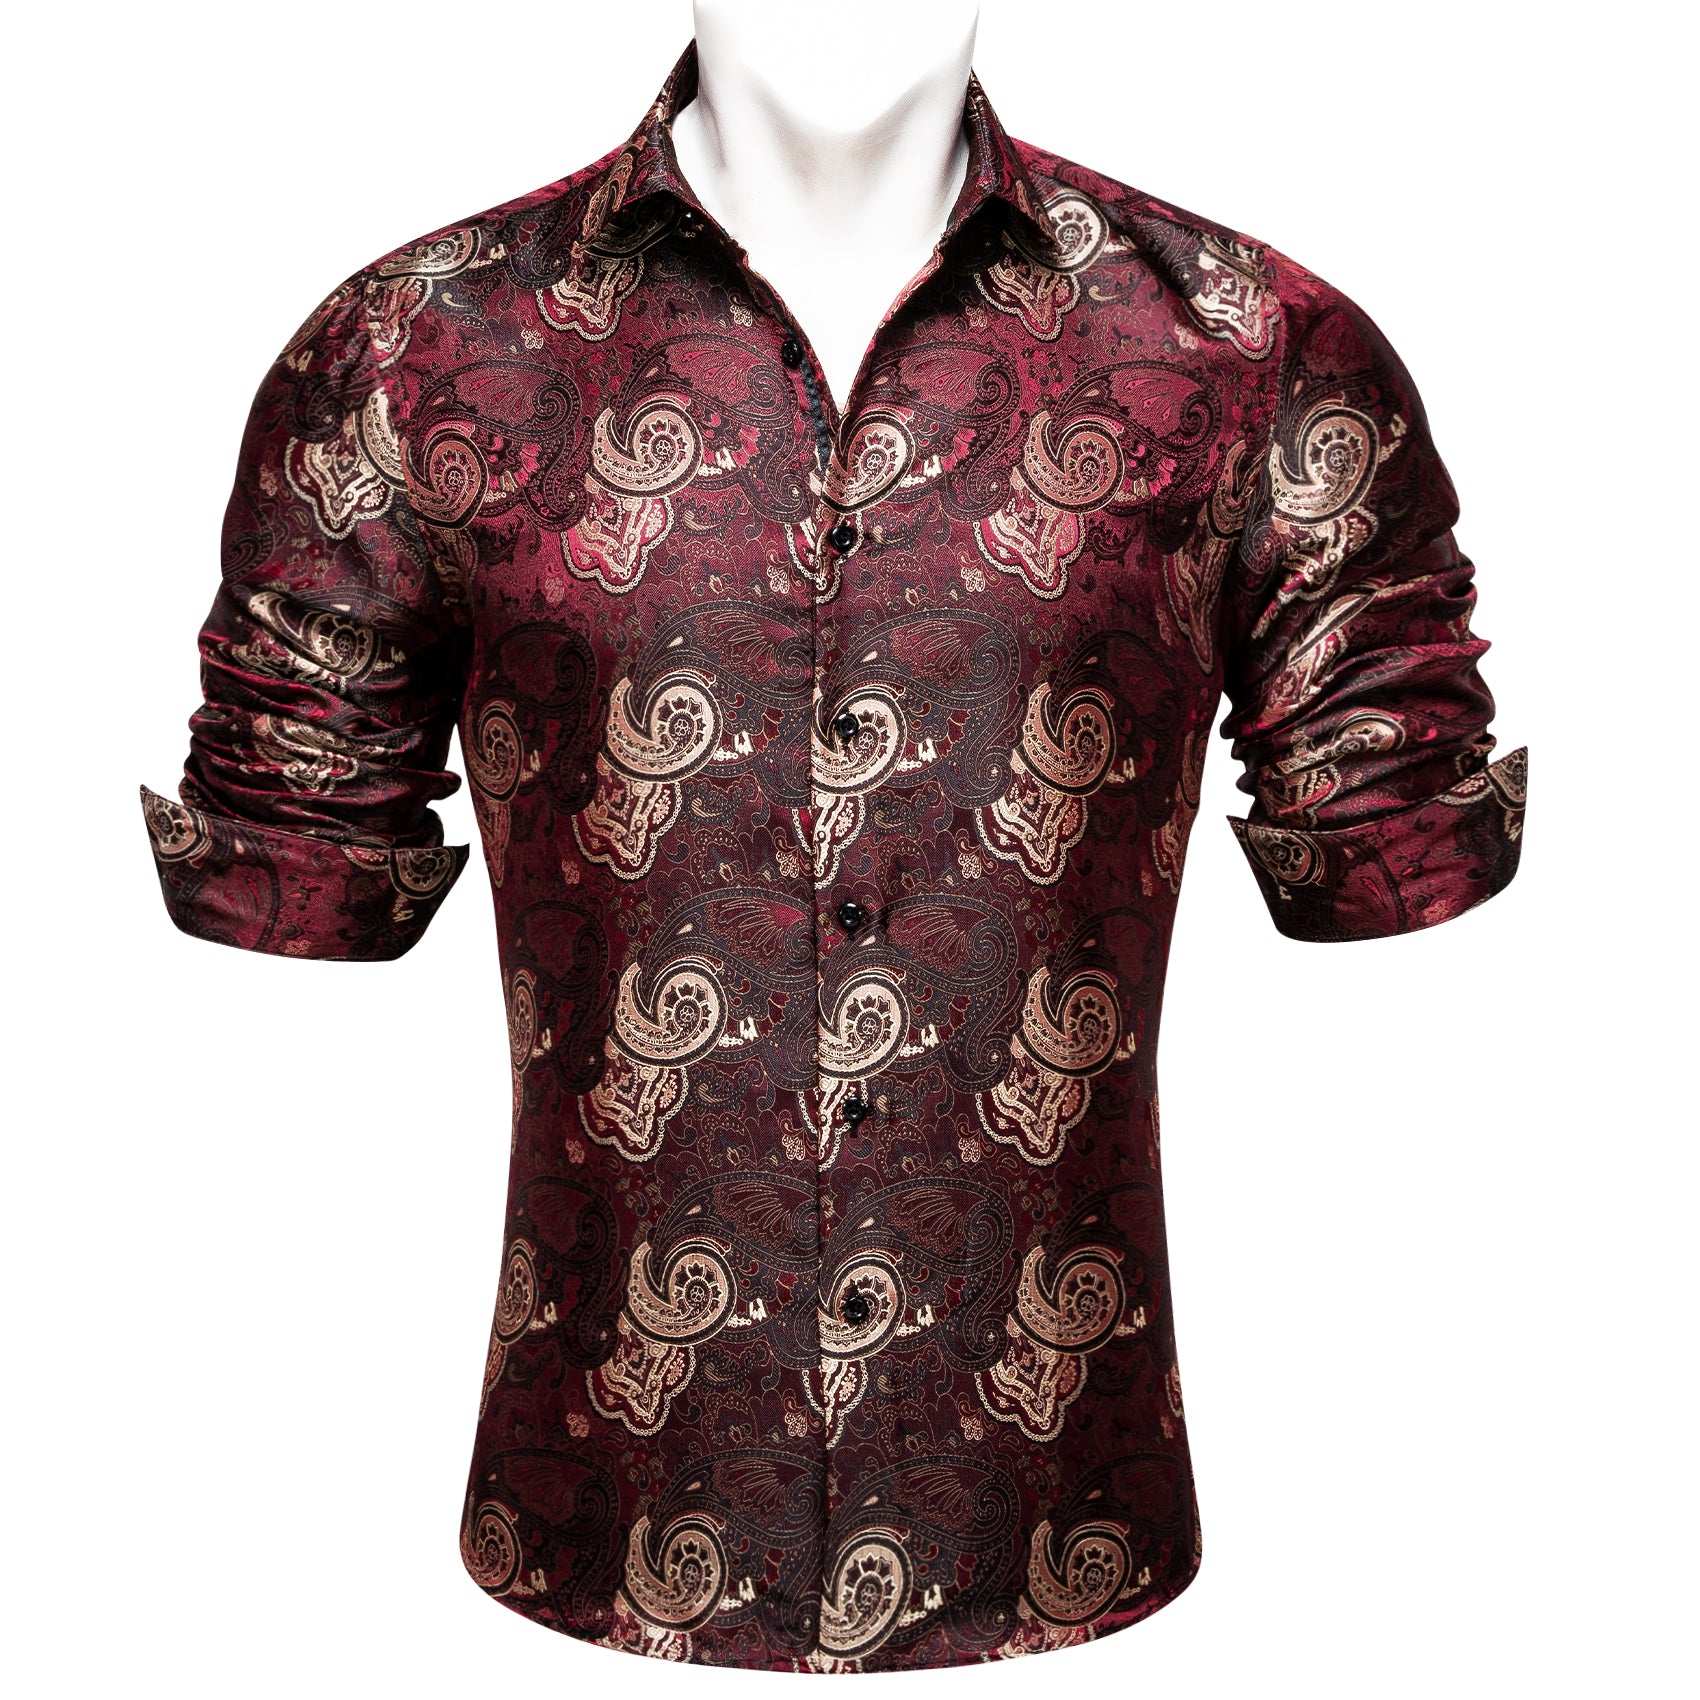 Barry.wang Red Brown Floral Shirt